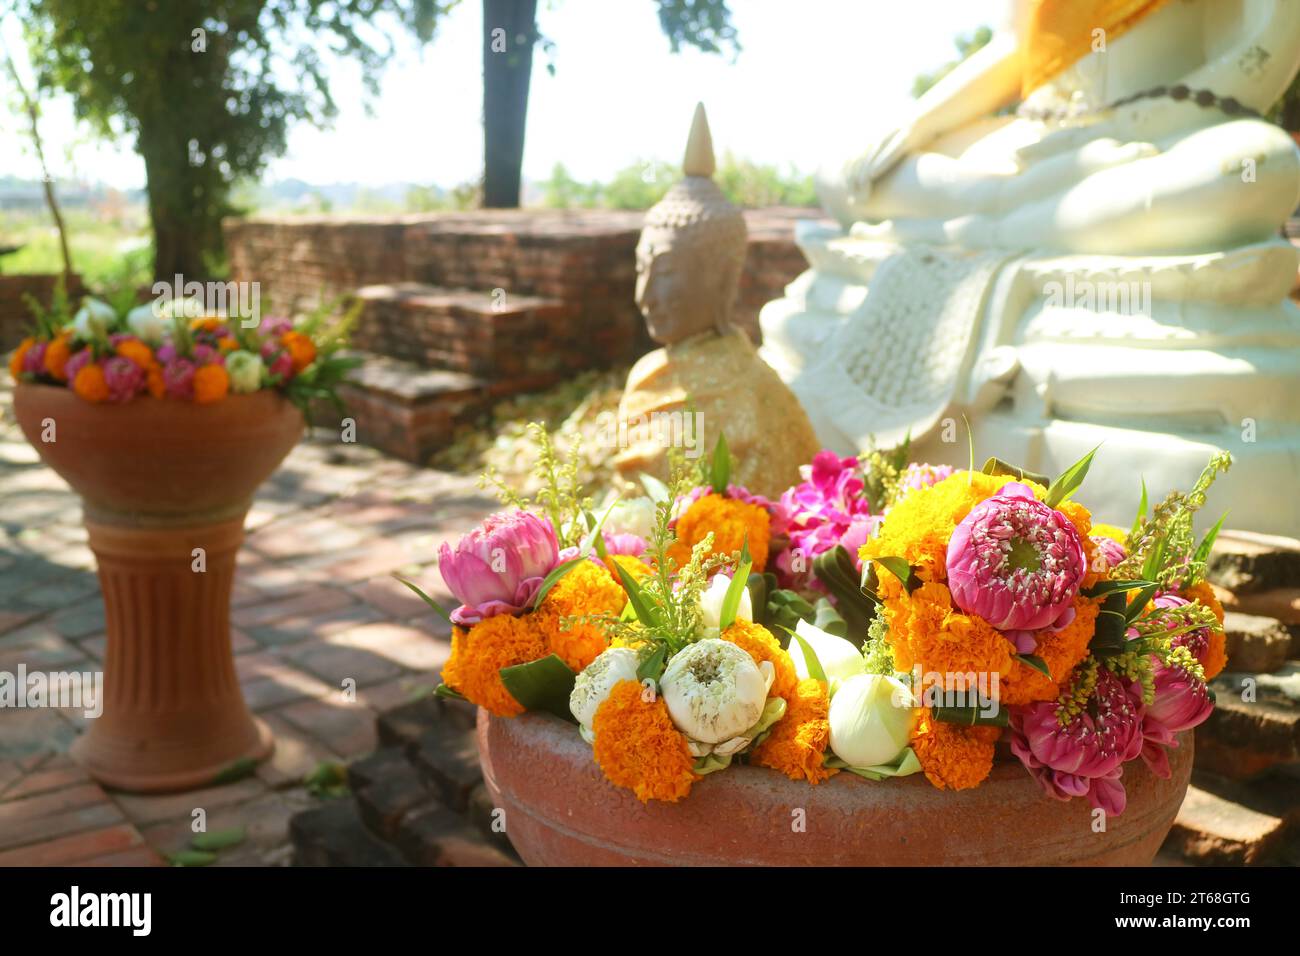 Bunches of Lotus and Marigold Flowers for the Offering in the Vases with Blurry Buddha Images in Background, Thailand Stock Photo